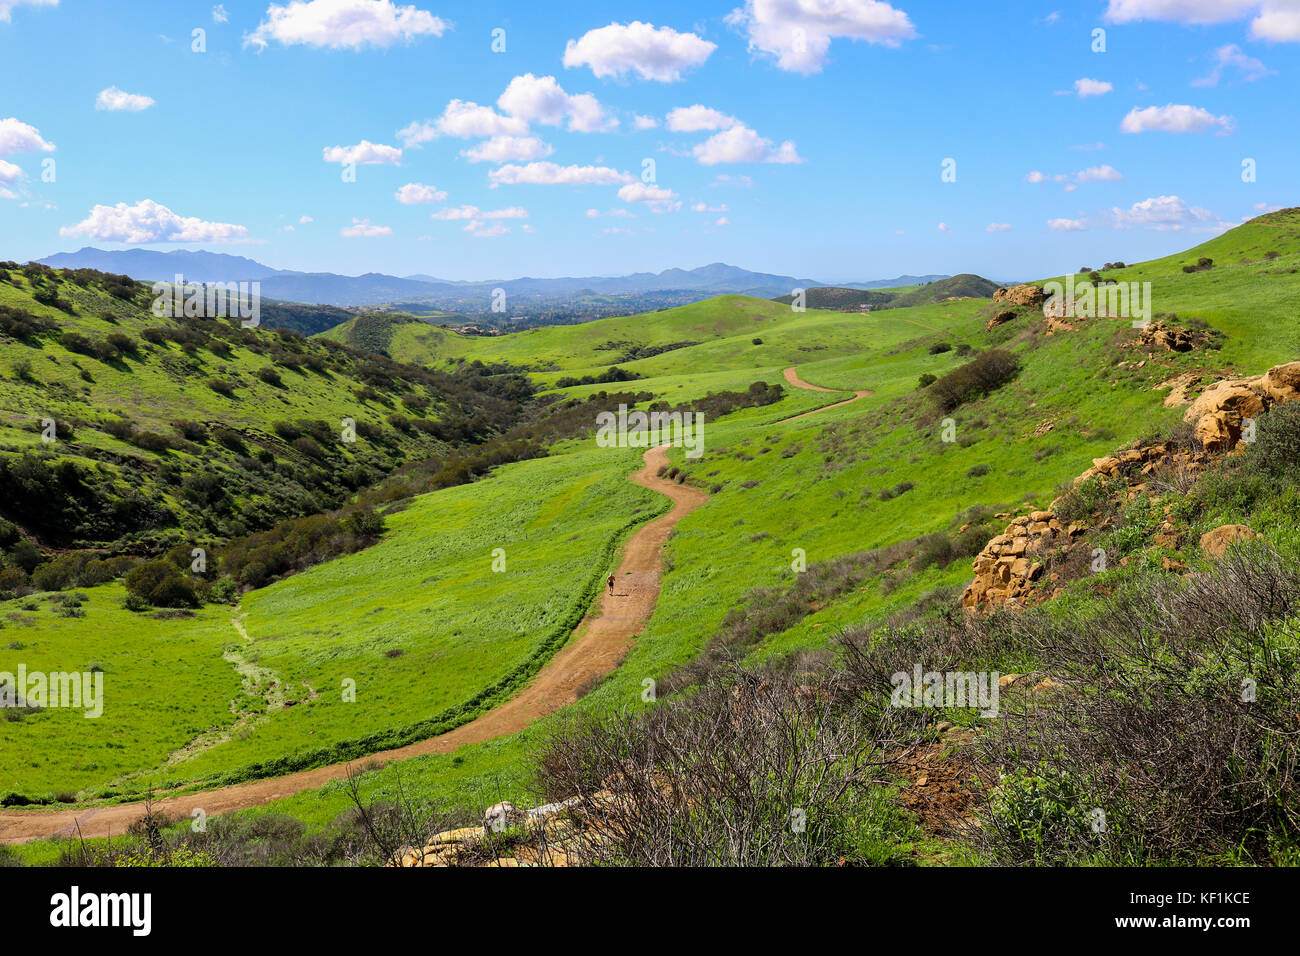 Lone Runner on Trail in Southern California Foothill Landscape Stock Photo